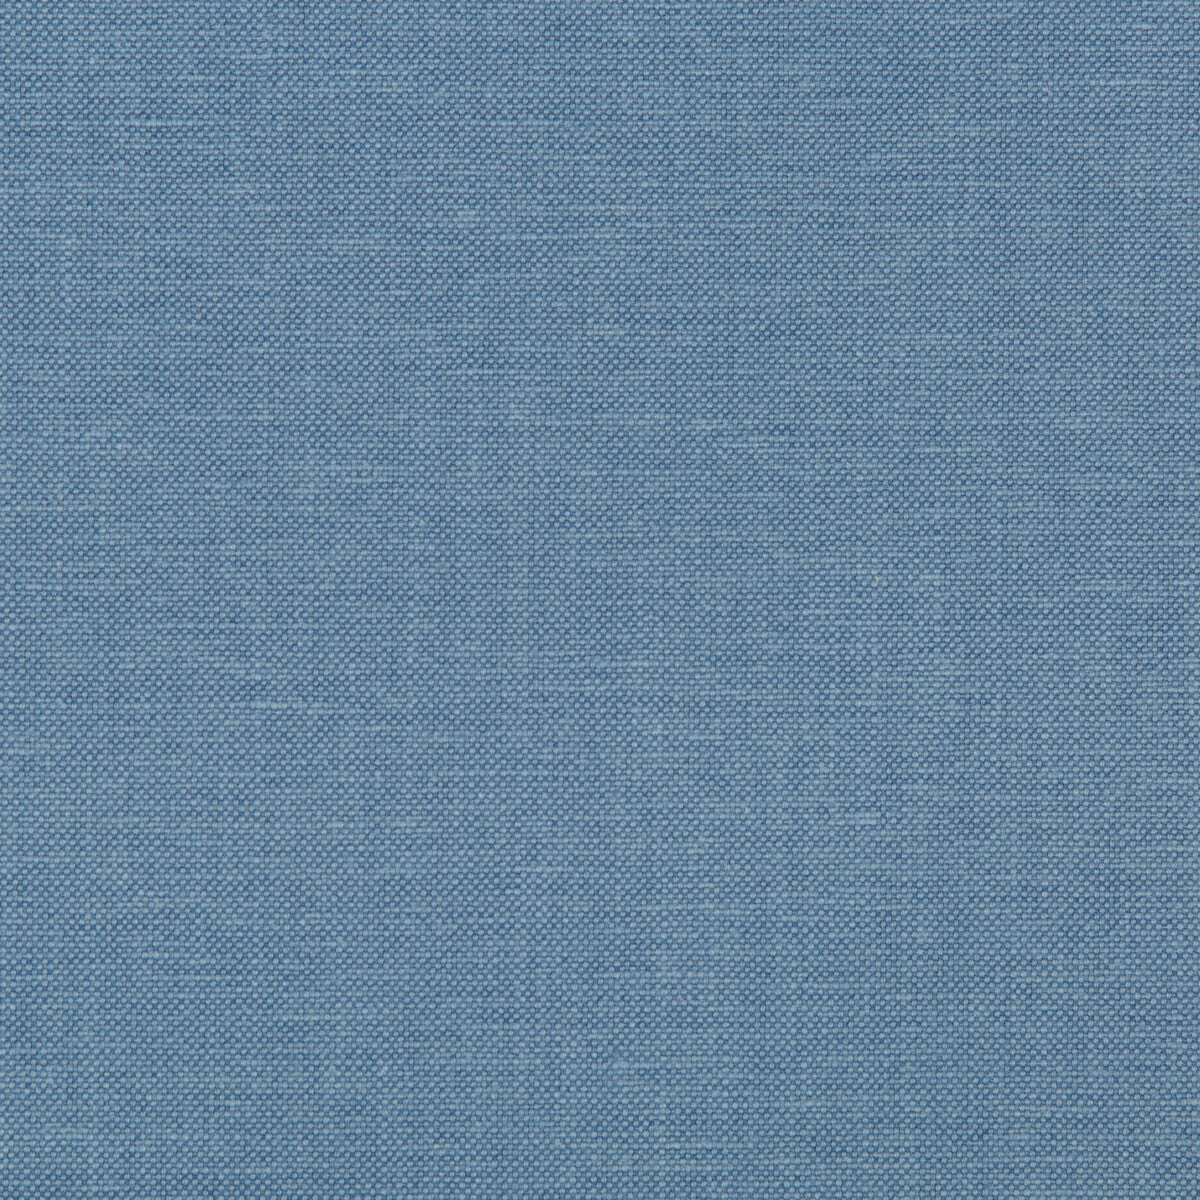 Oxfordian fabric in chambray color - pattern 35543.15.0 - by Kravet Basics in the Bermuda collection